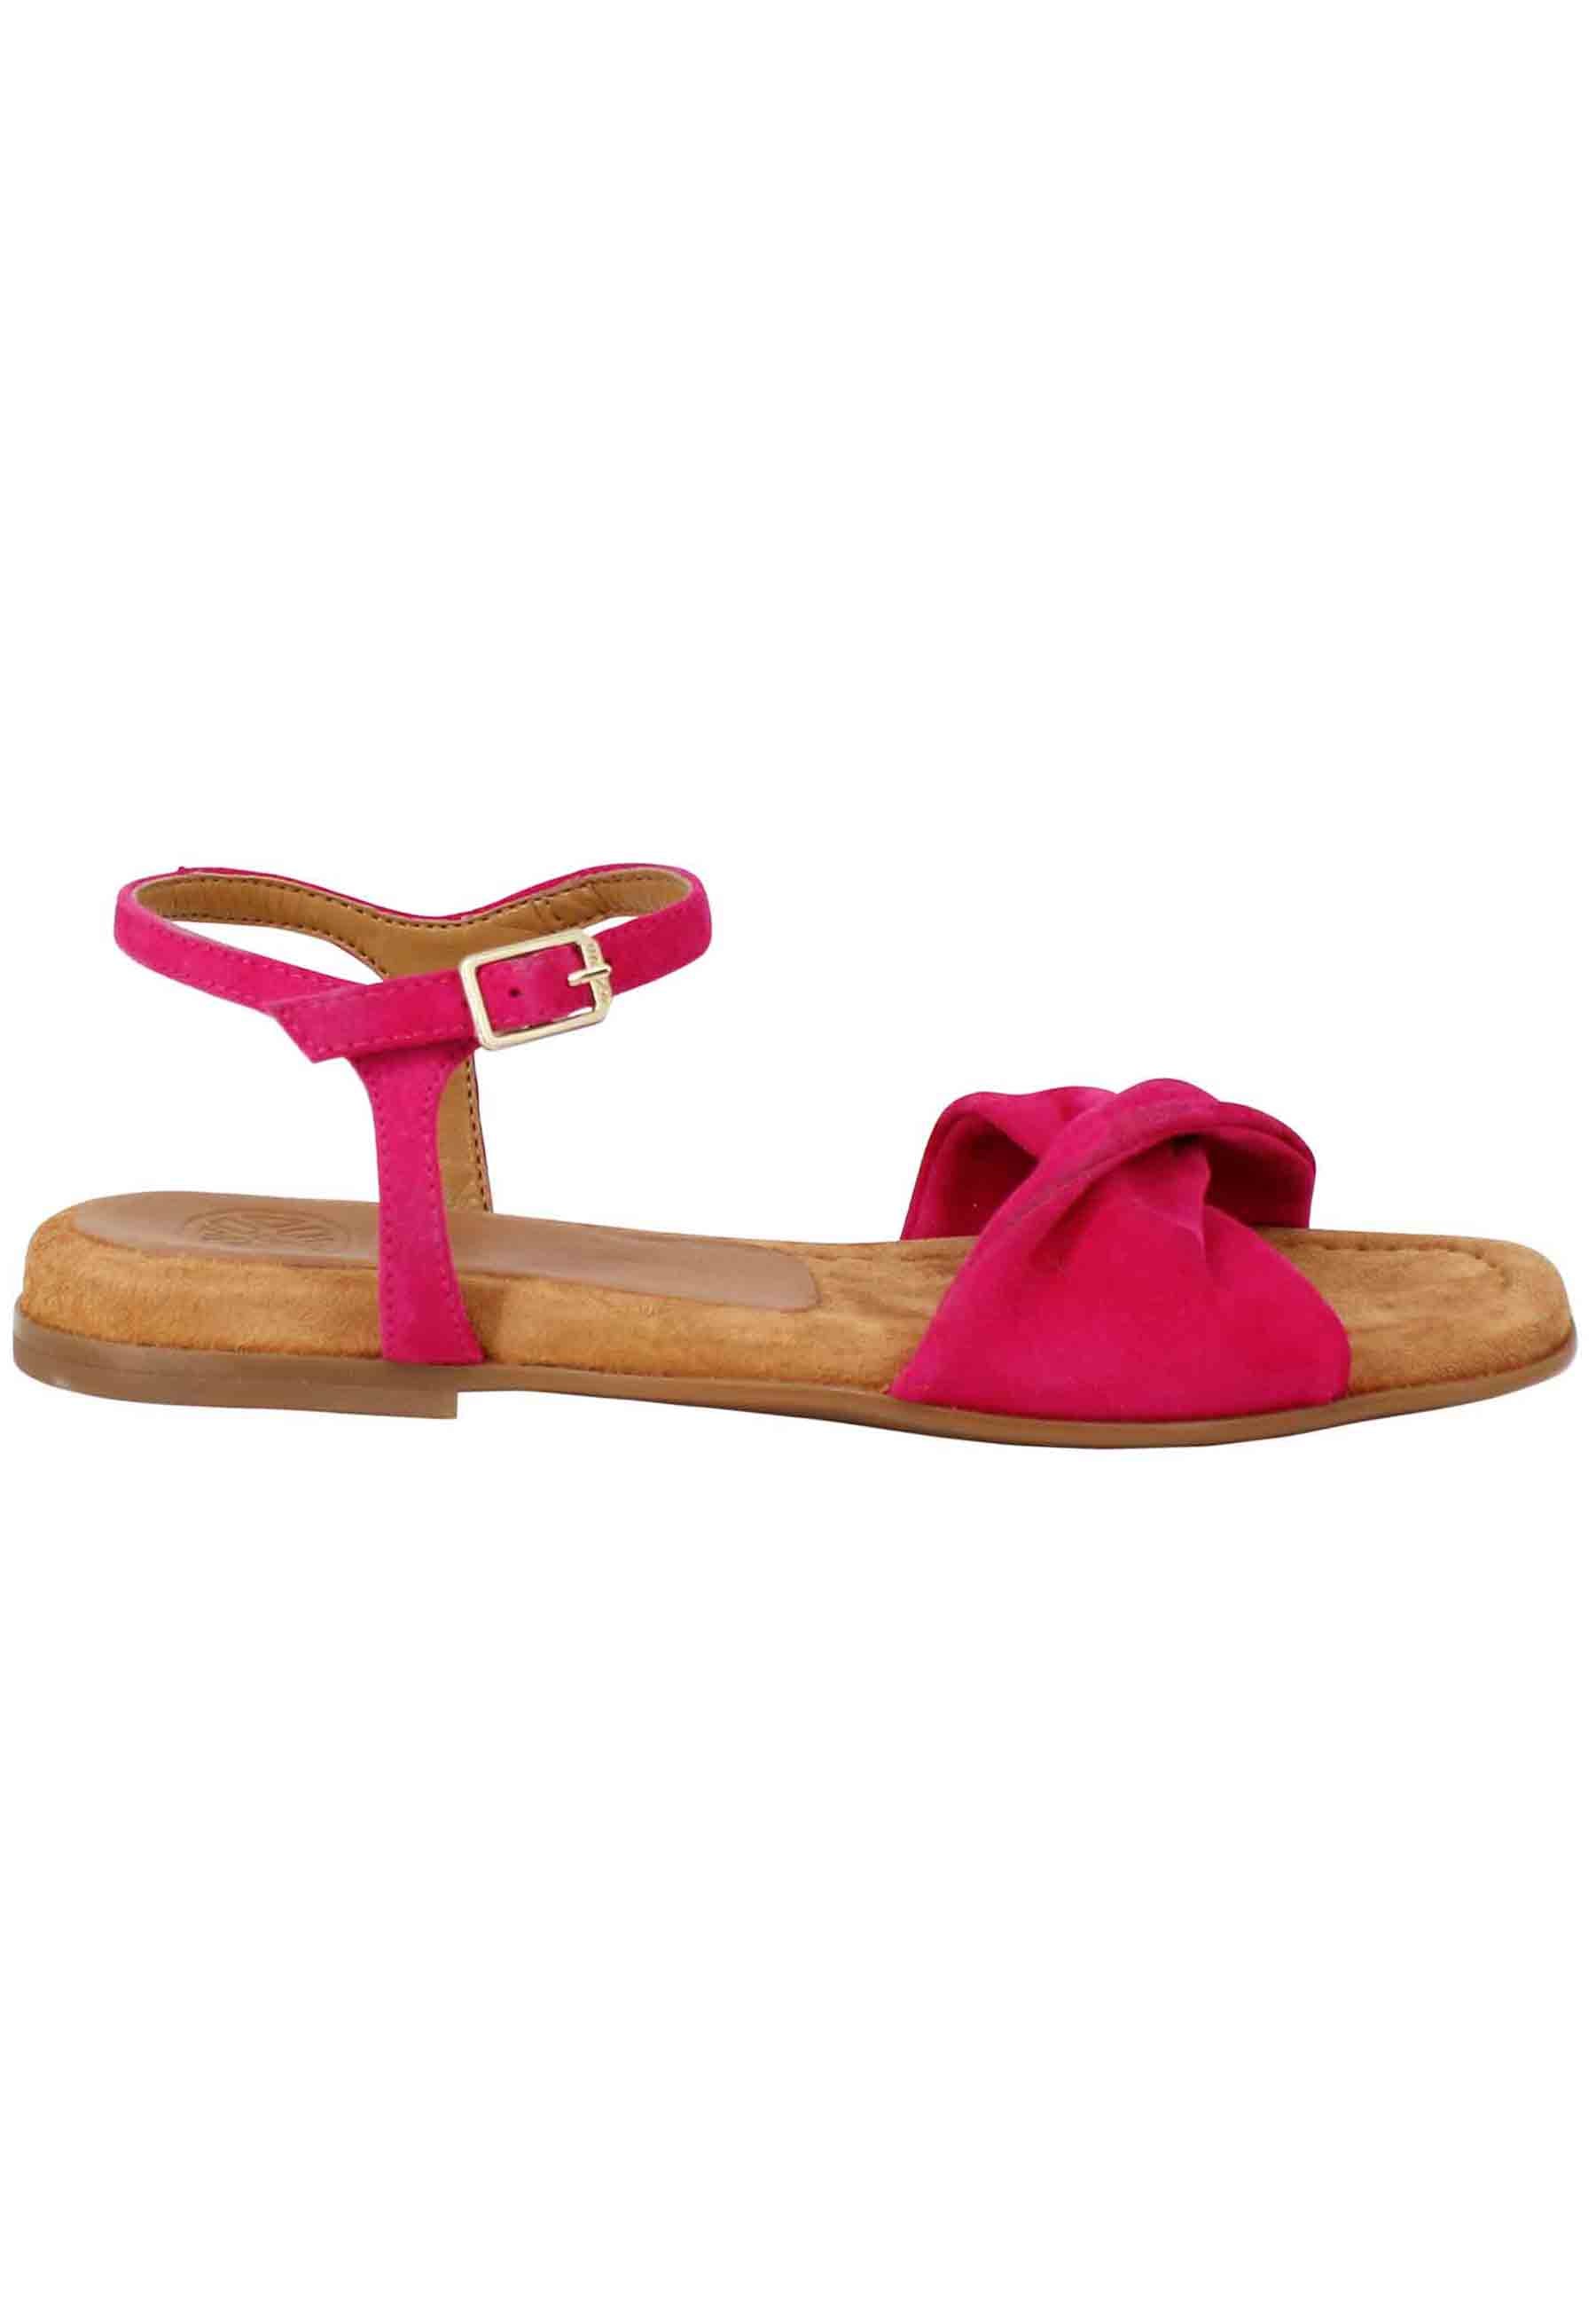 Women's flat sandals in strawberry suede with strap and padded insole